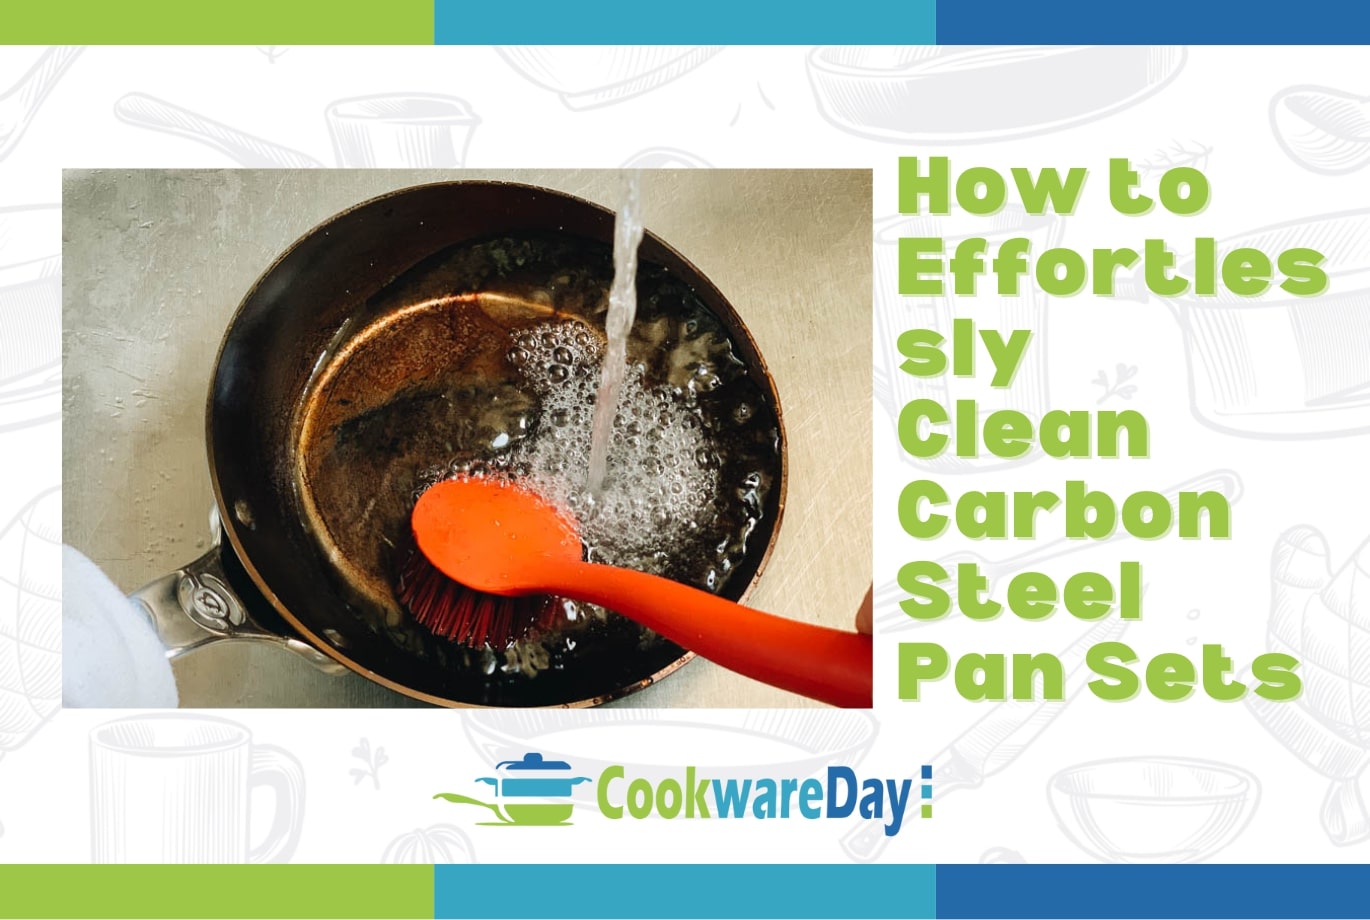 How to Effortlessly Clean Carbon Steel Pan Sets